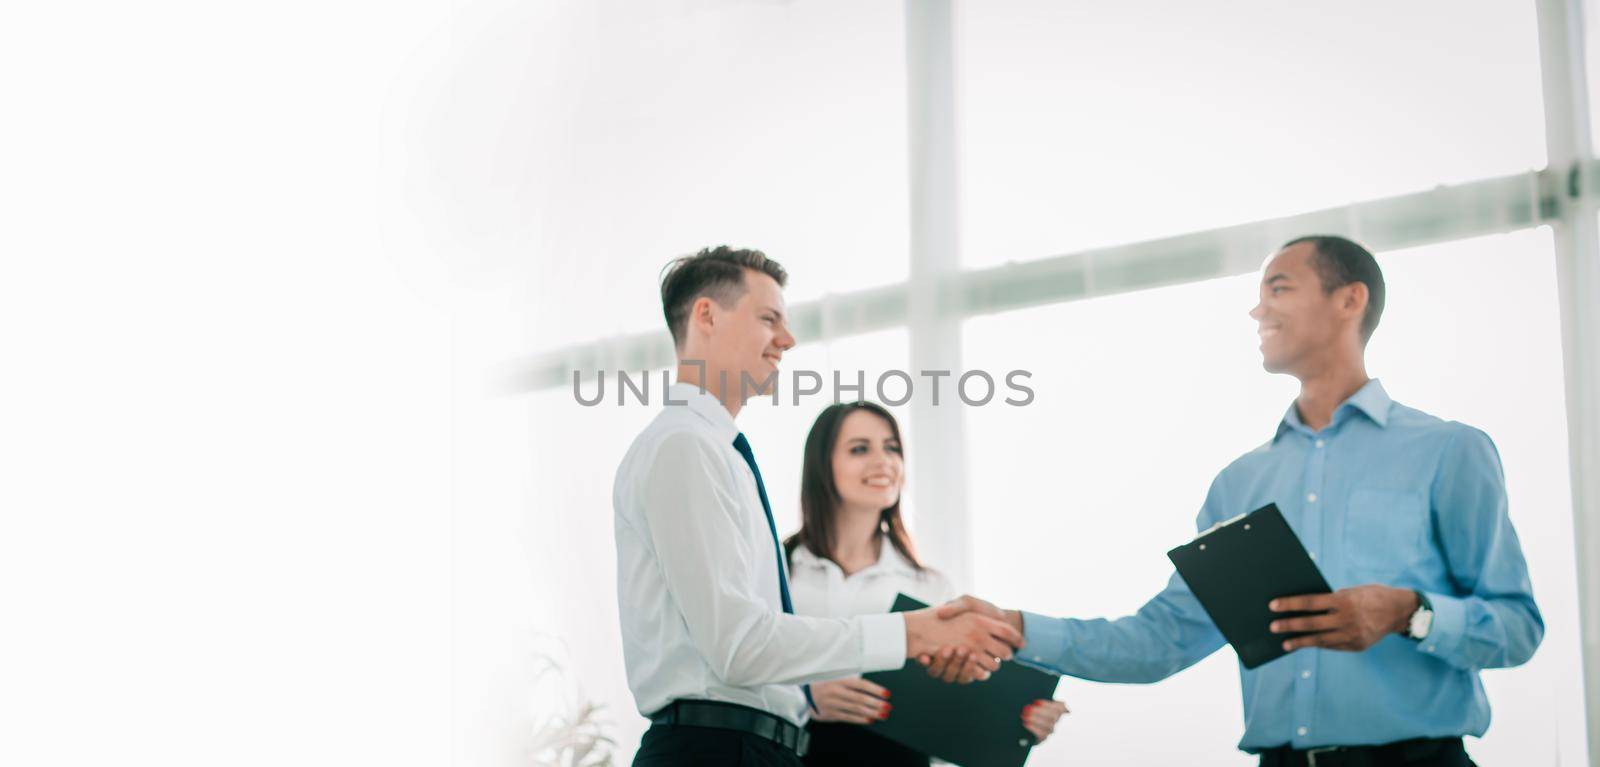 friendly business people shaking hands on blurred background.photo with copy space